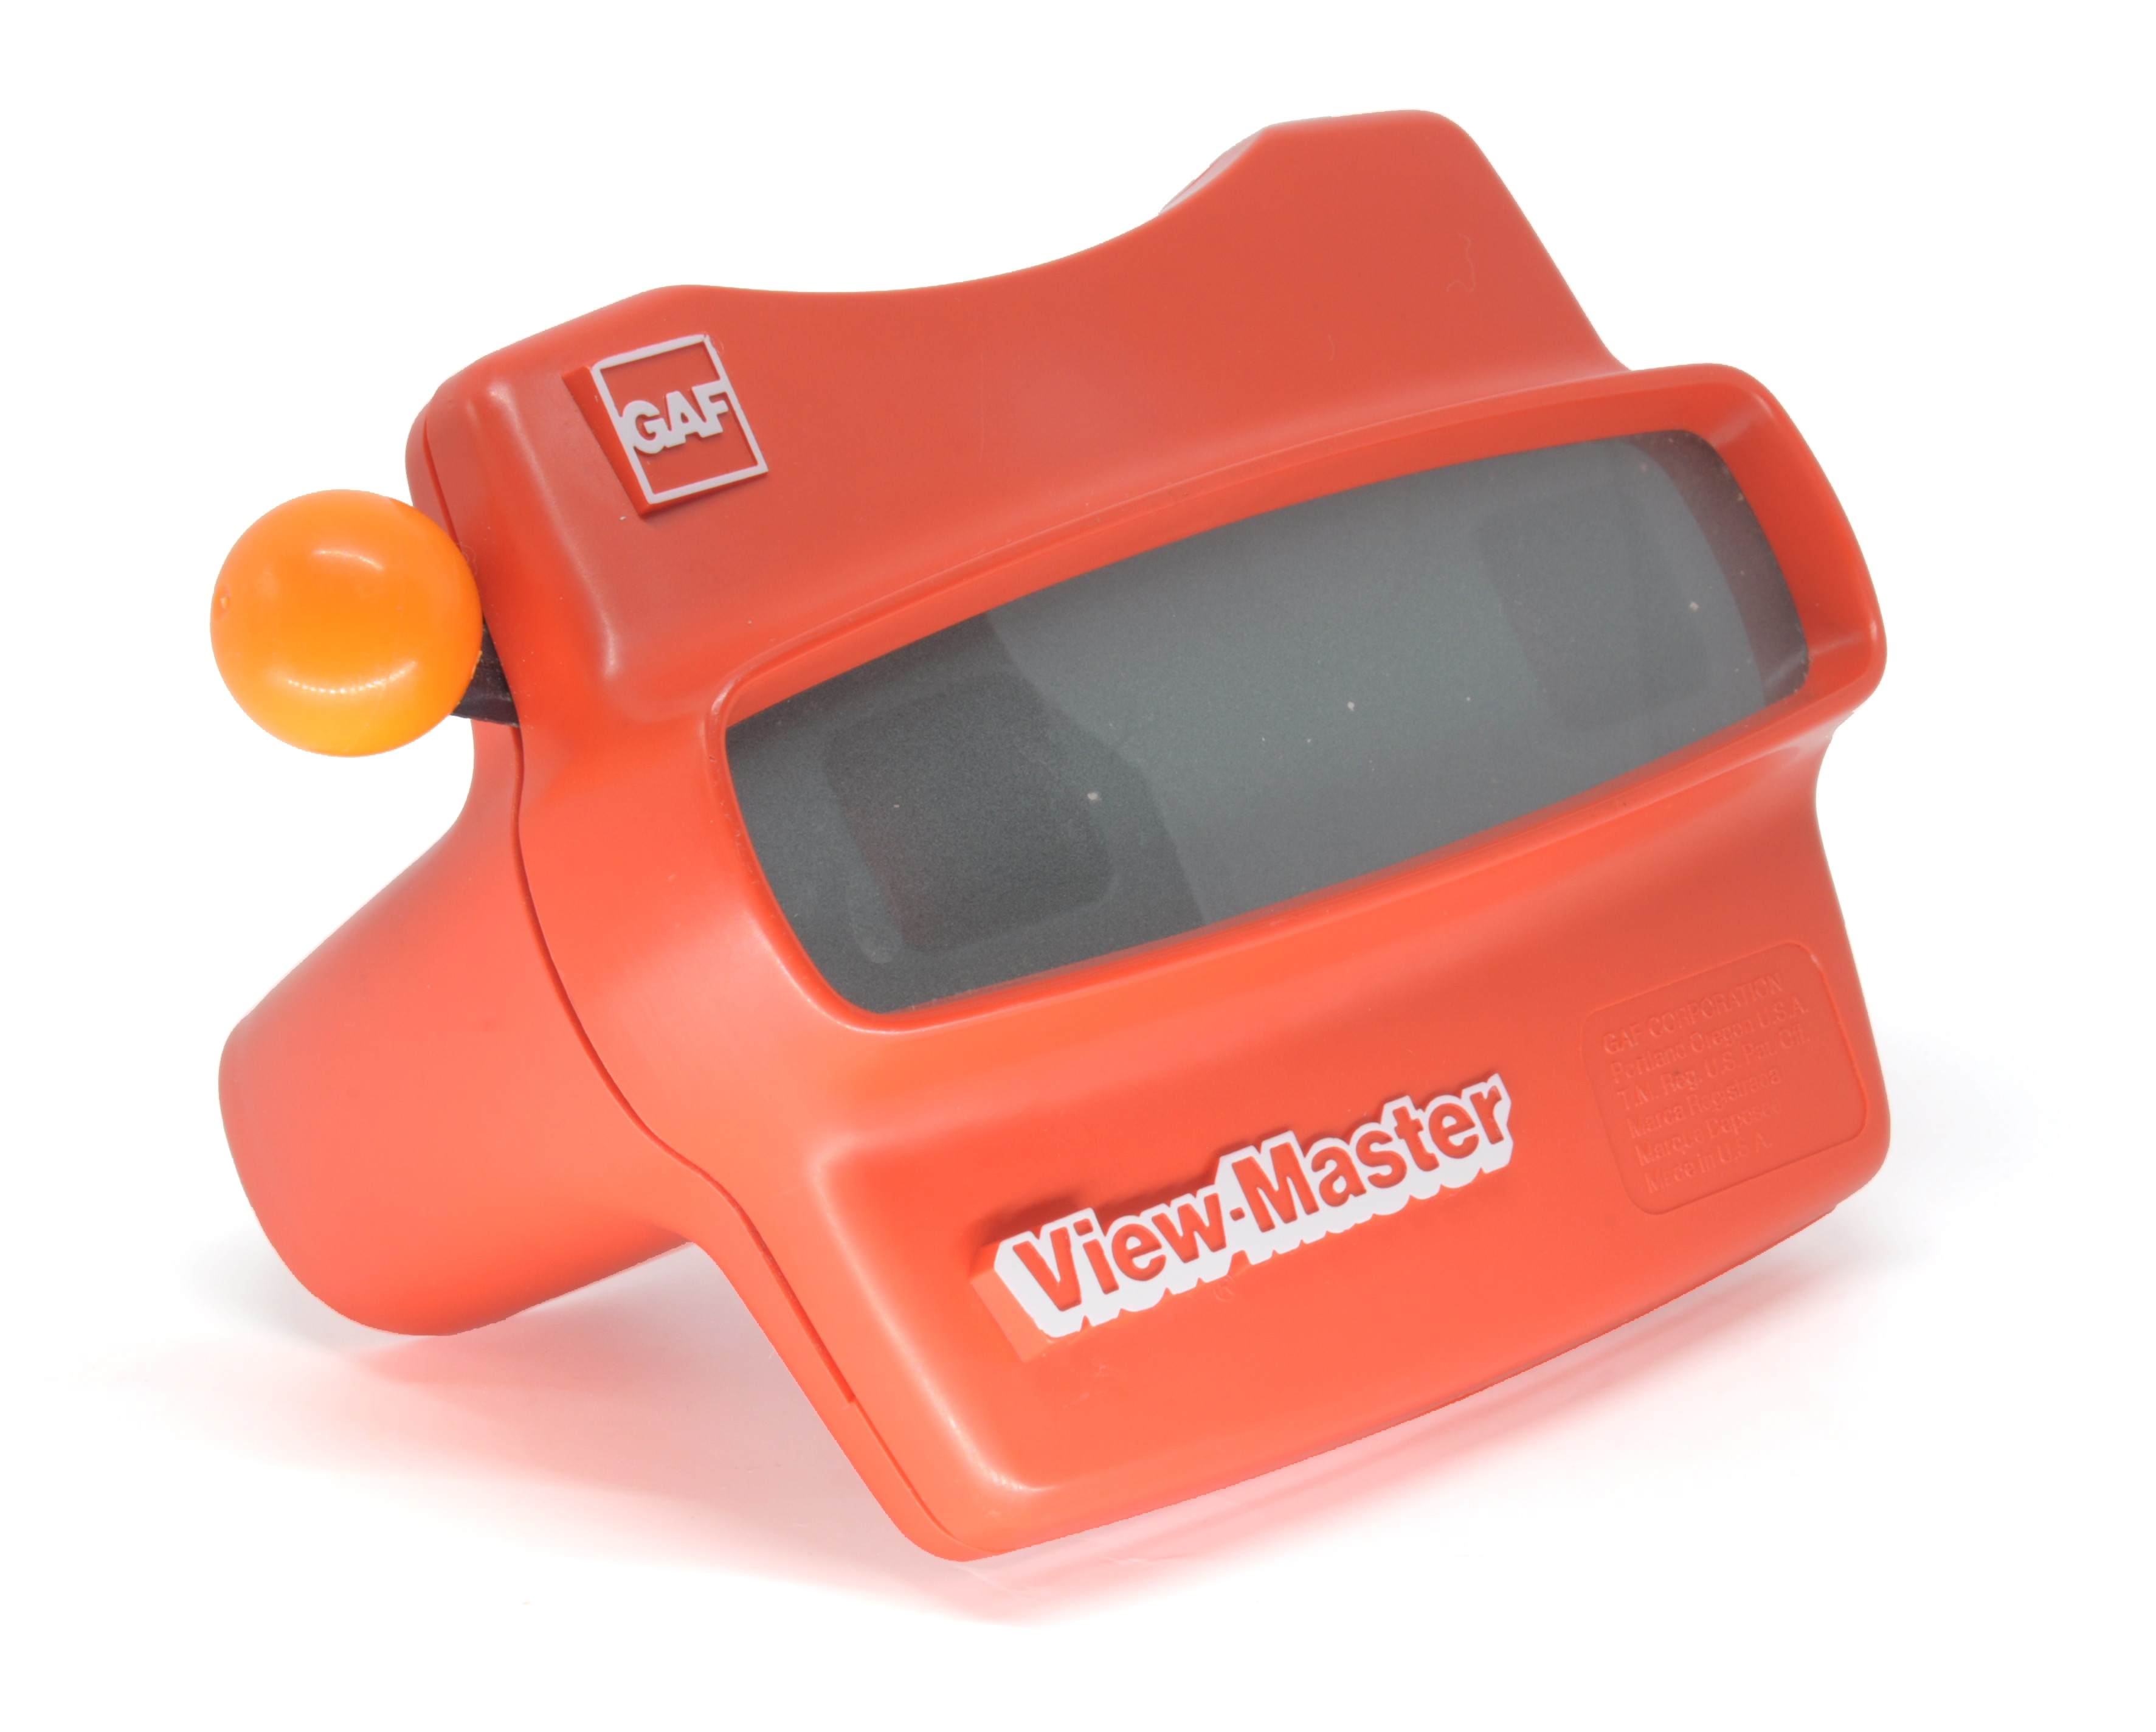 An image of the classiv view-master